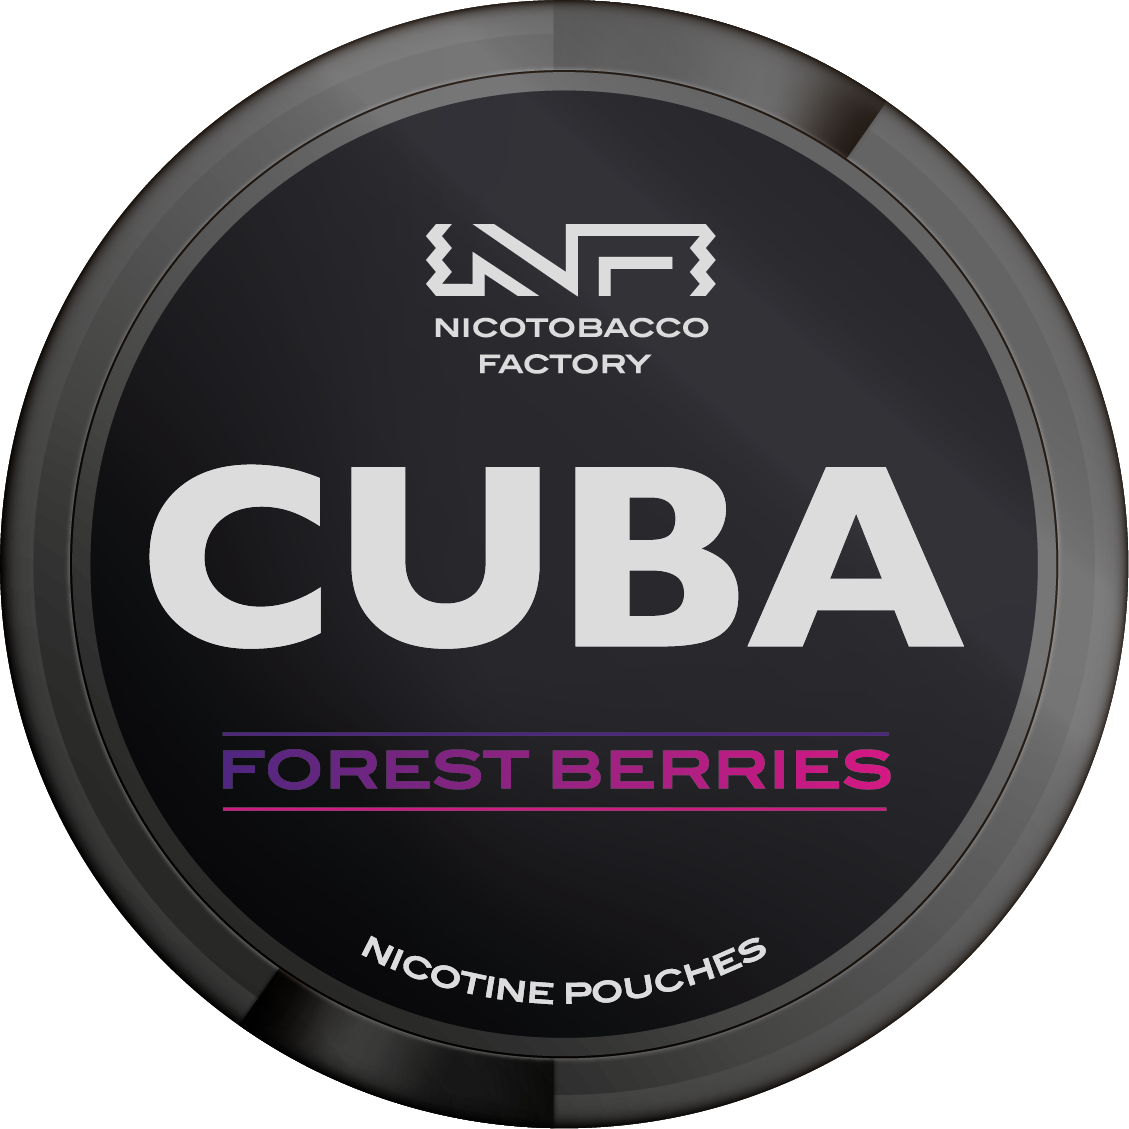 Black Forrest Berries Nicotine Pouches By Cuba